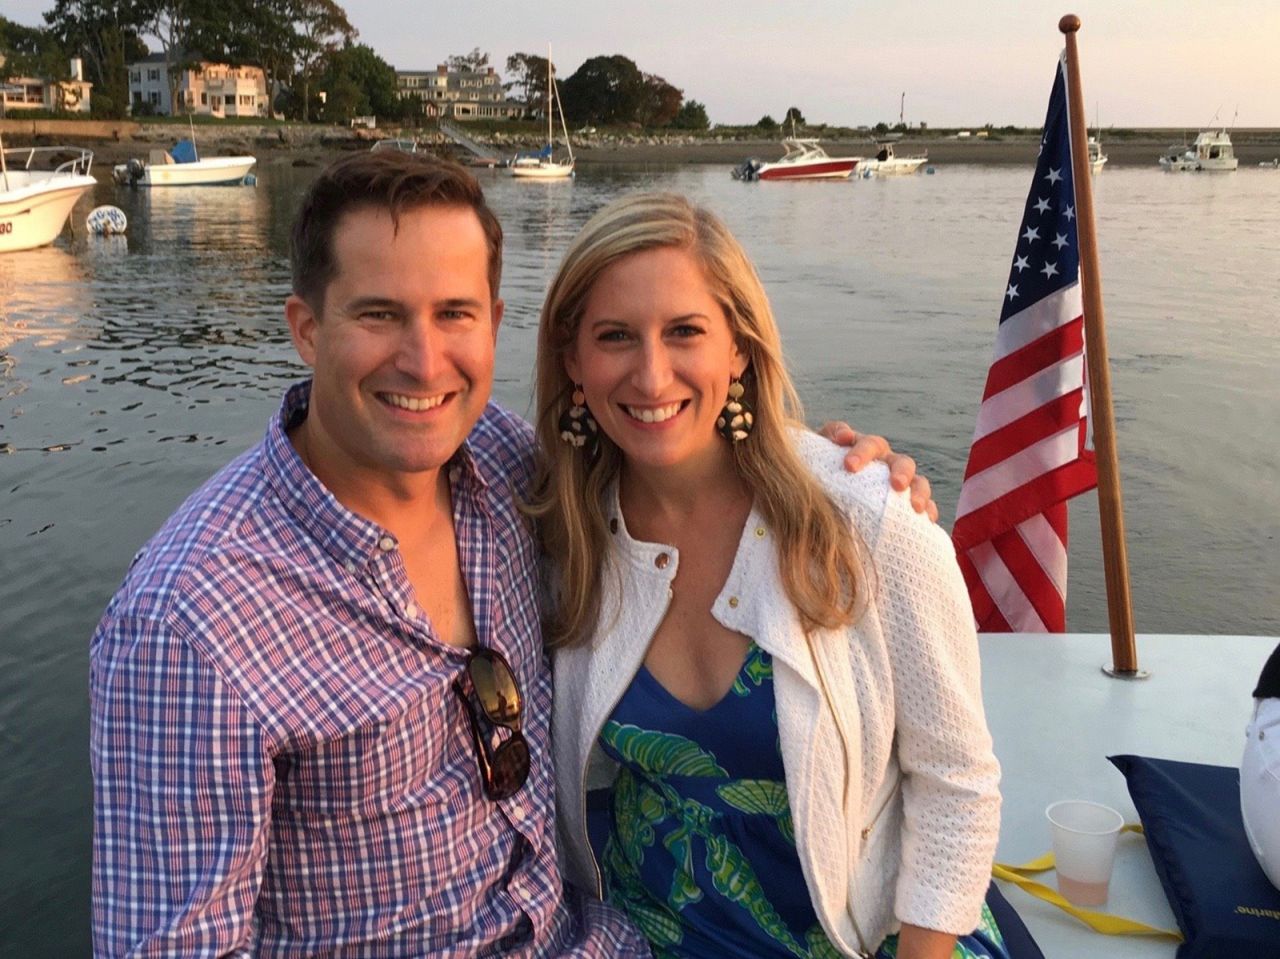 Moulton and his wife, Liz, in a photo <a href="https://www.facebook.com/SethMoulton/photos/a.270602479745362/1033836170088652/?type=3&theater" target="_blank" target="_blank">he posted to Facebook</a> in January 2018.